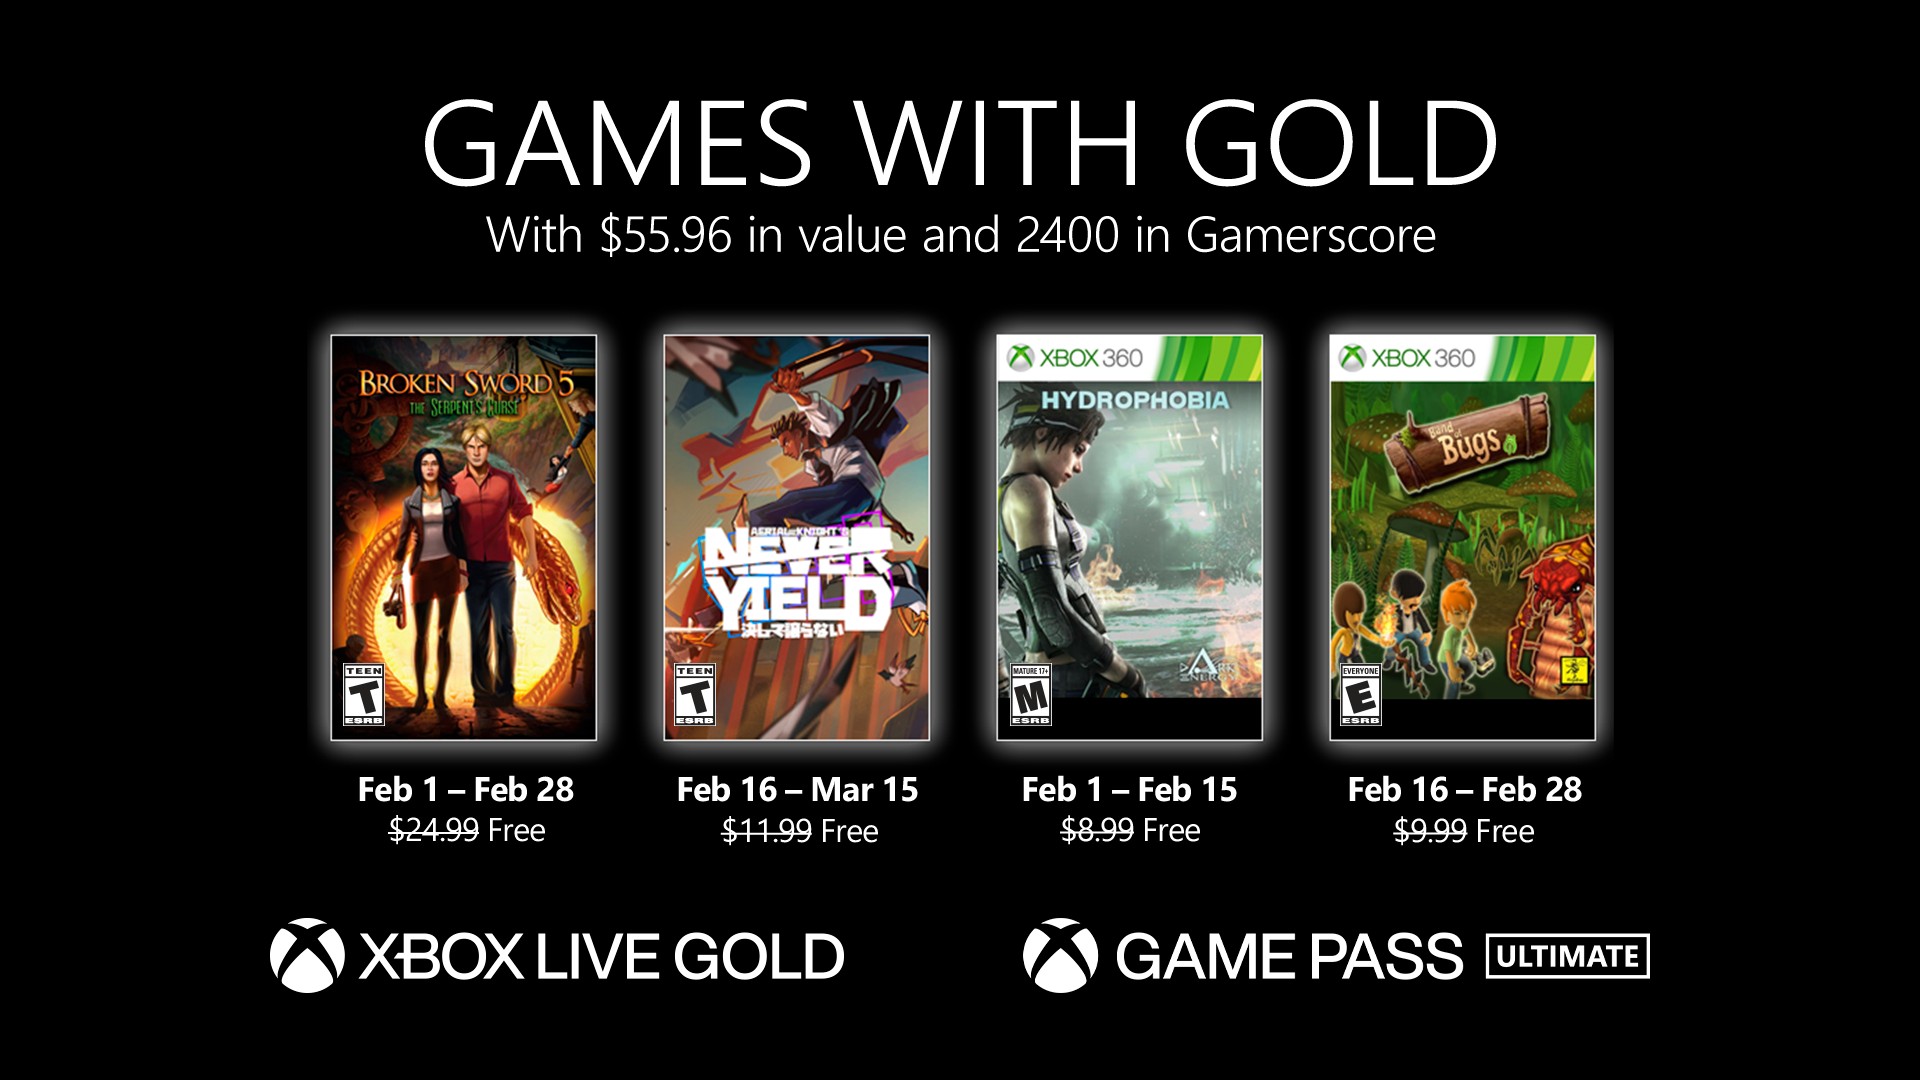 Games With Gold February 2022 lineup confirmed